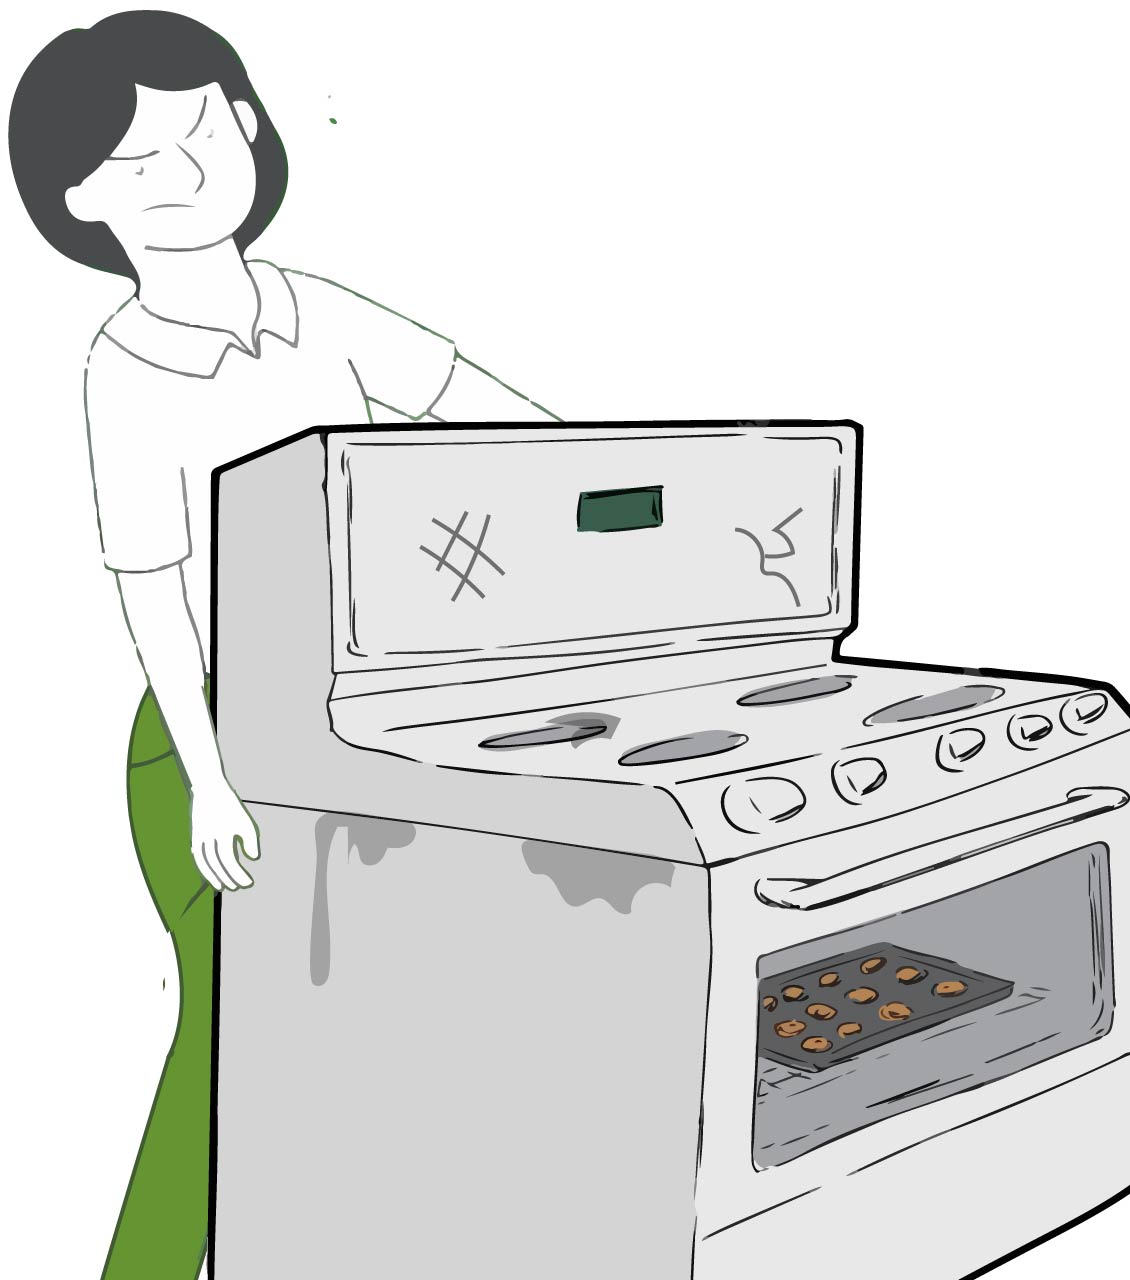 Montgomery oven removal services